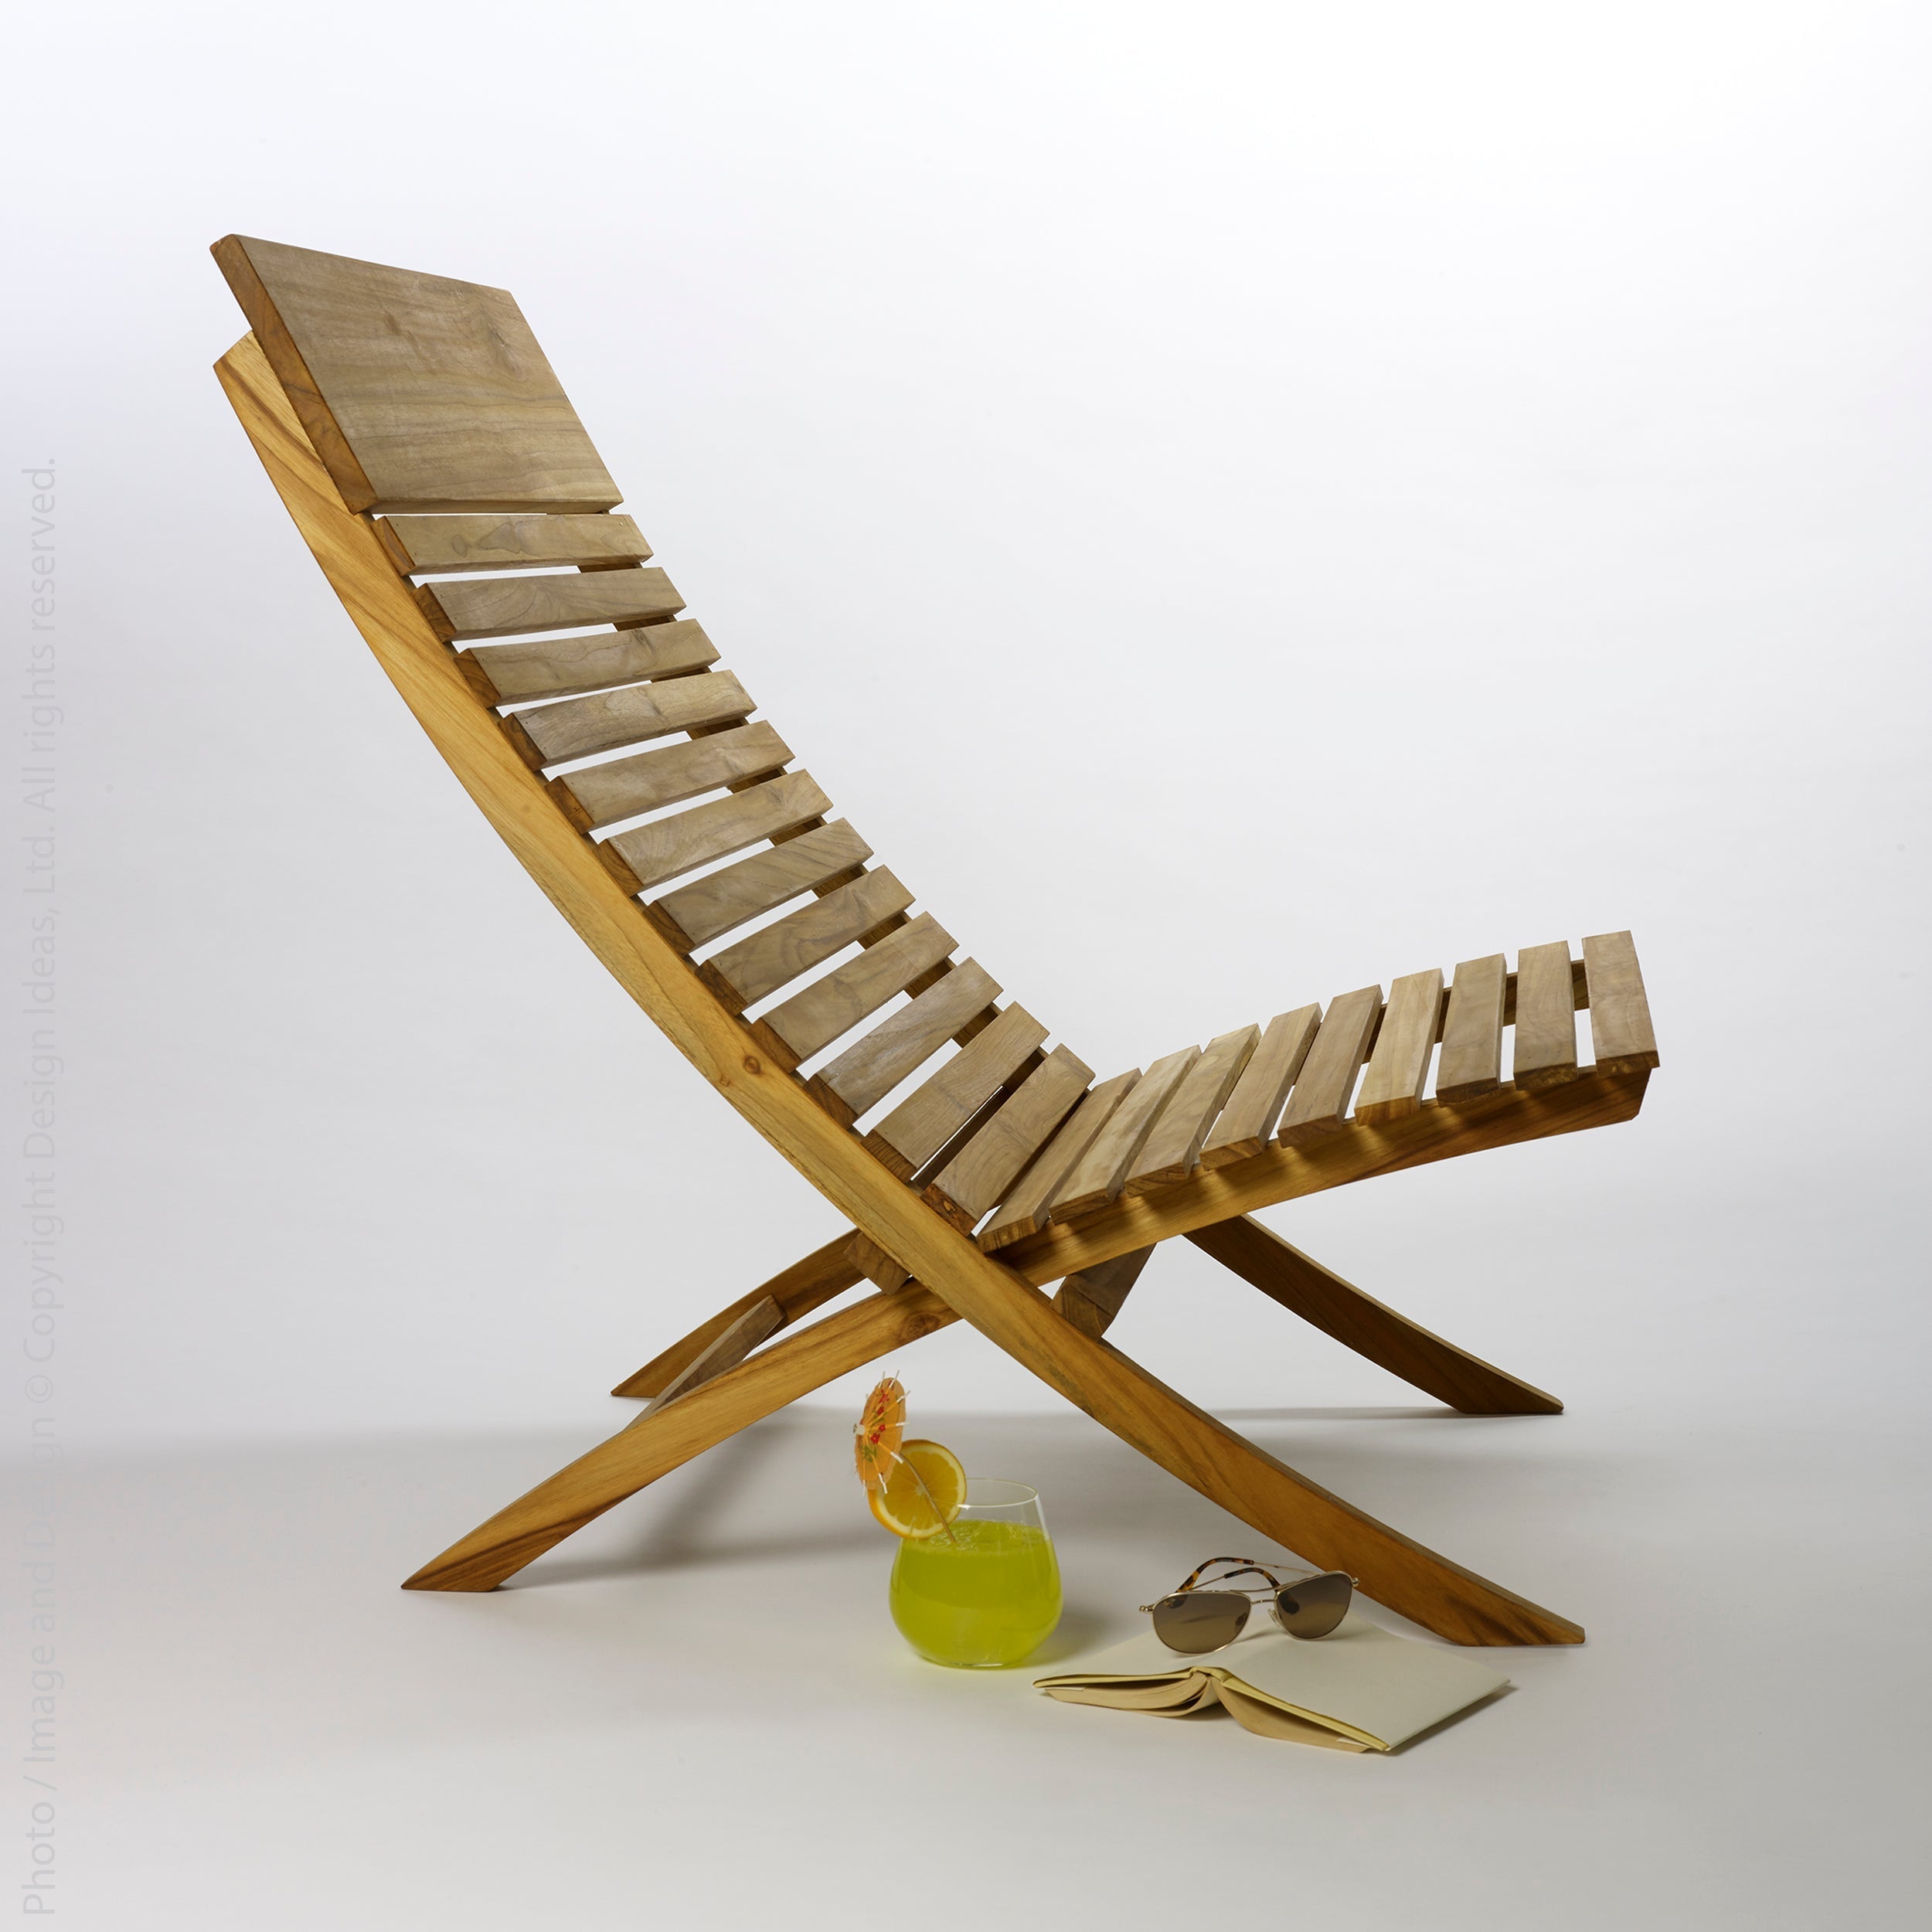 Barcelona Teak Beach Chair natural Color | Image 3 | From the Barcelona Collection | Masterfully assembled with natural teak for long lasting use | This chair is sustainably sourced | Available in natural color | texxture home